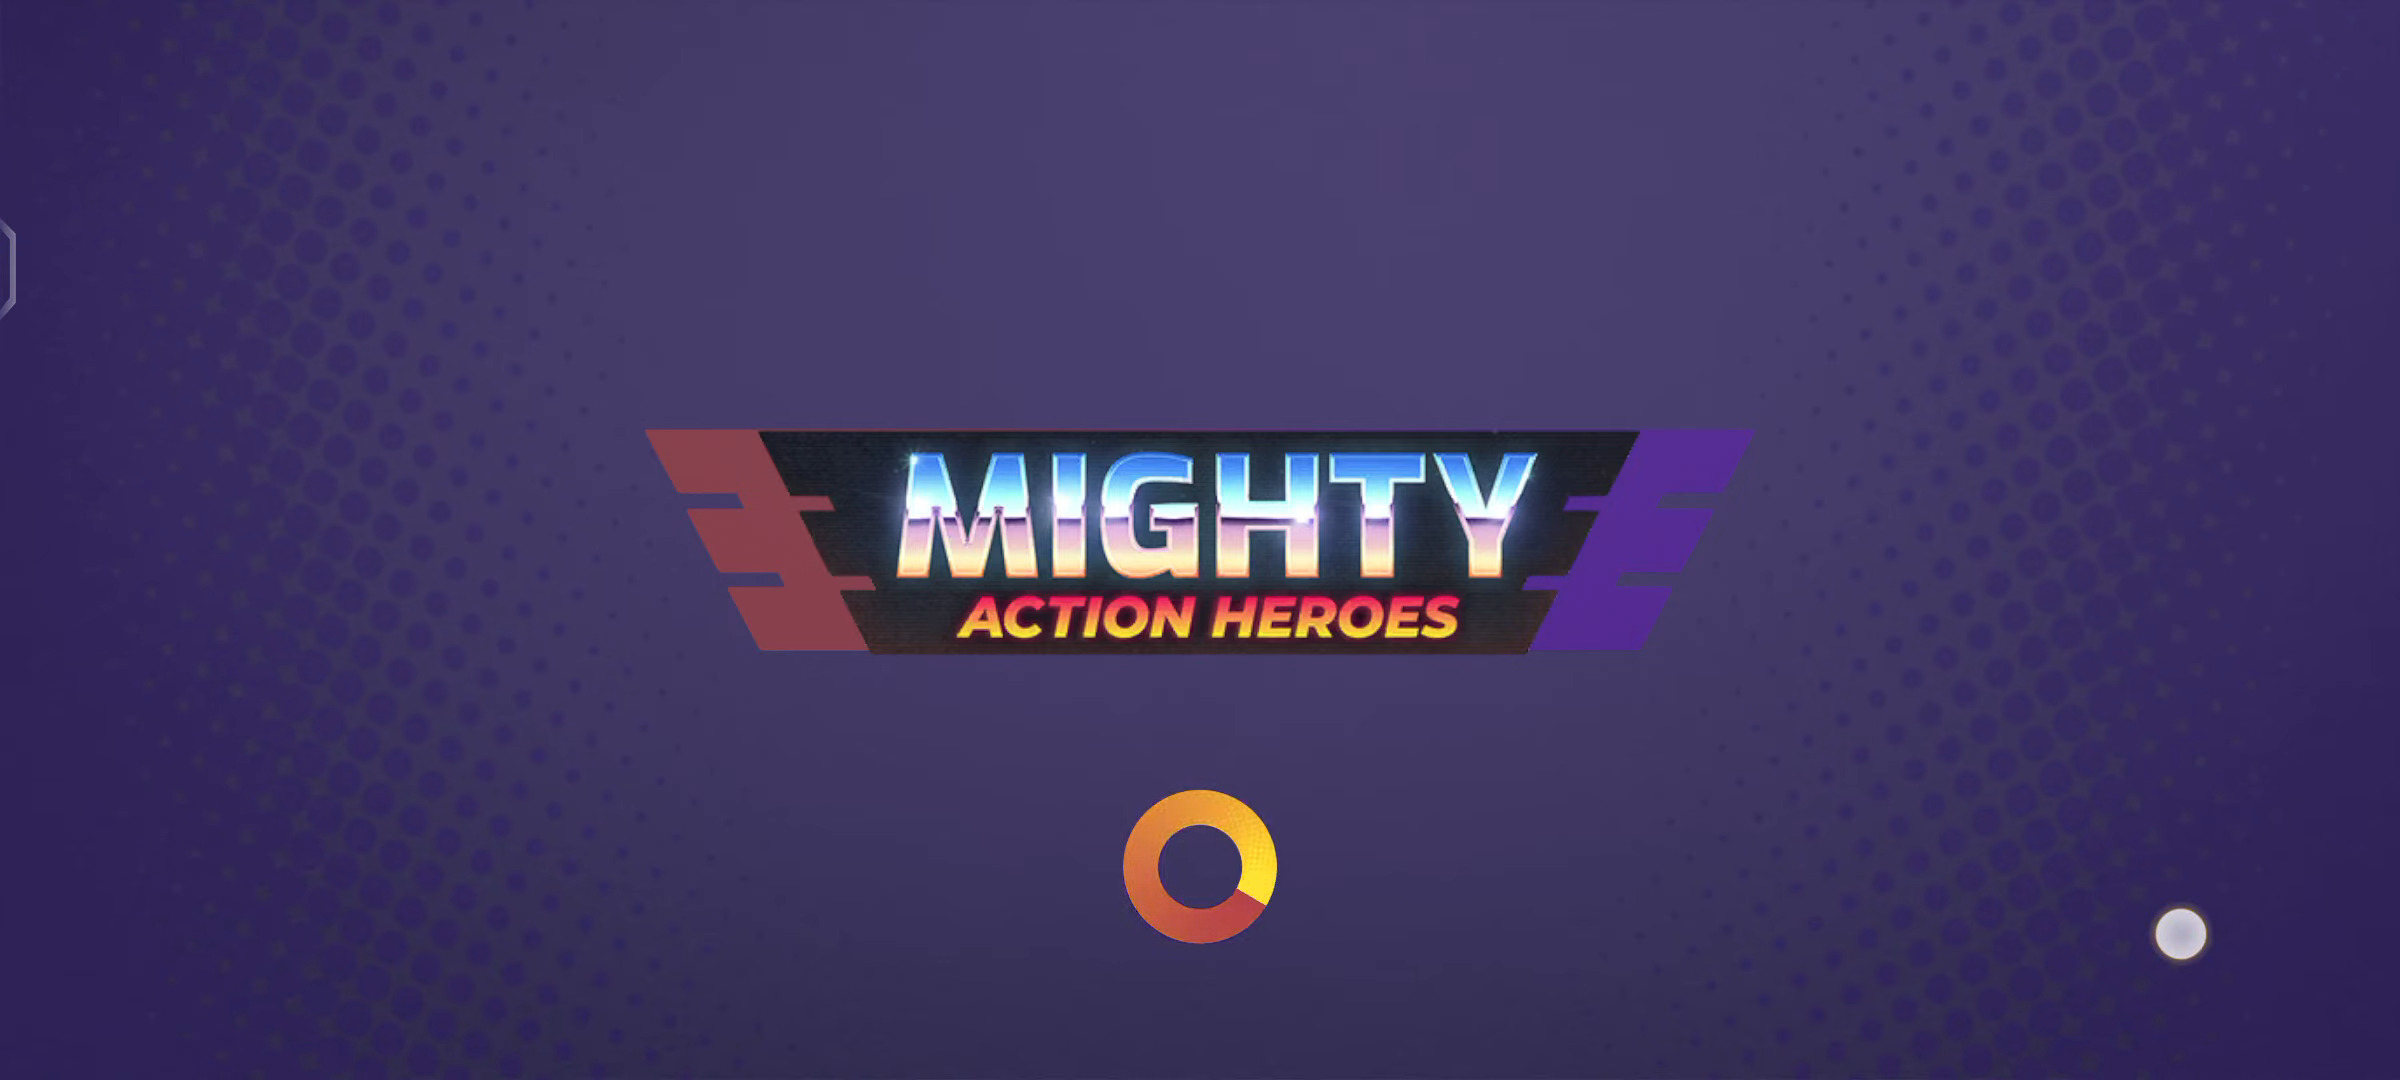 Scarica Mighty Action Heroes gratis per Android.